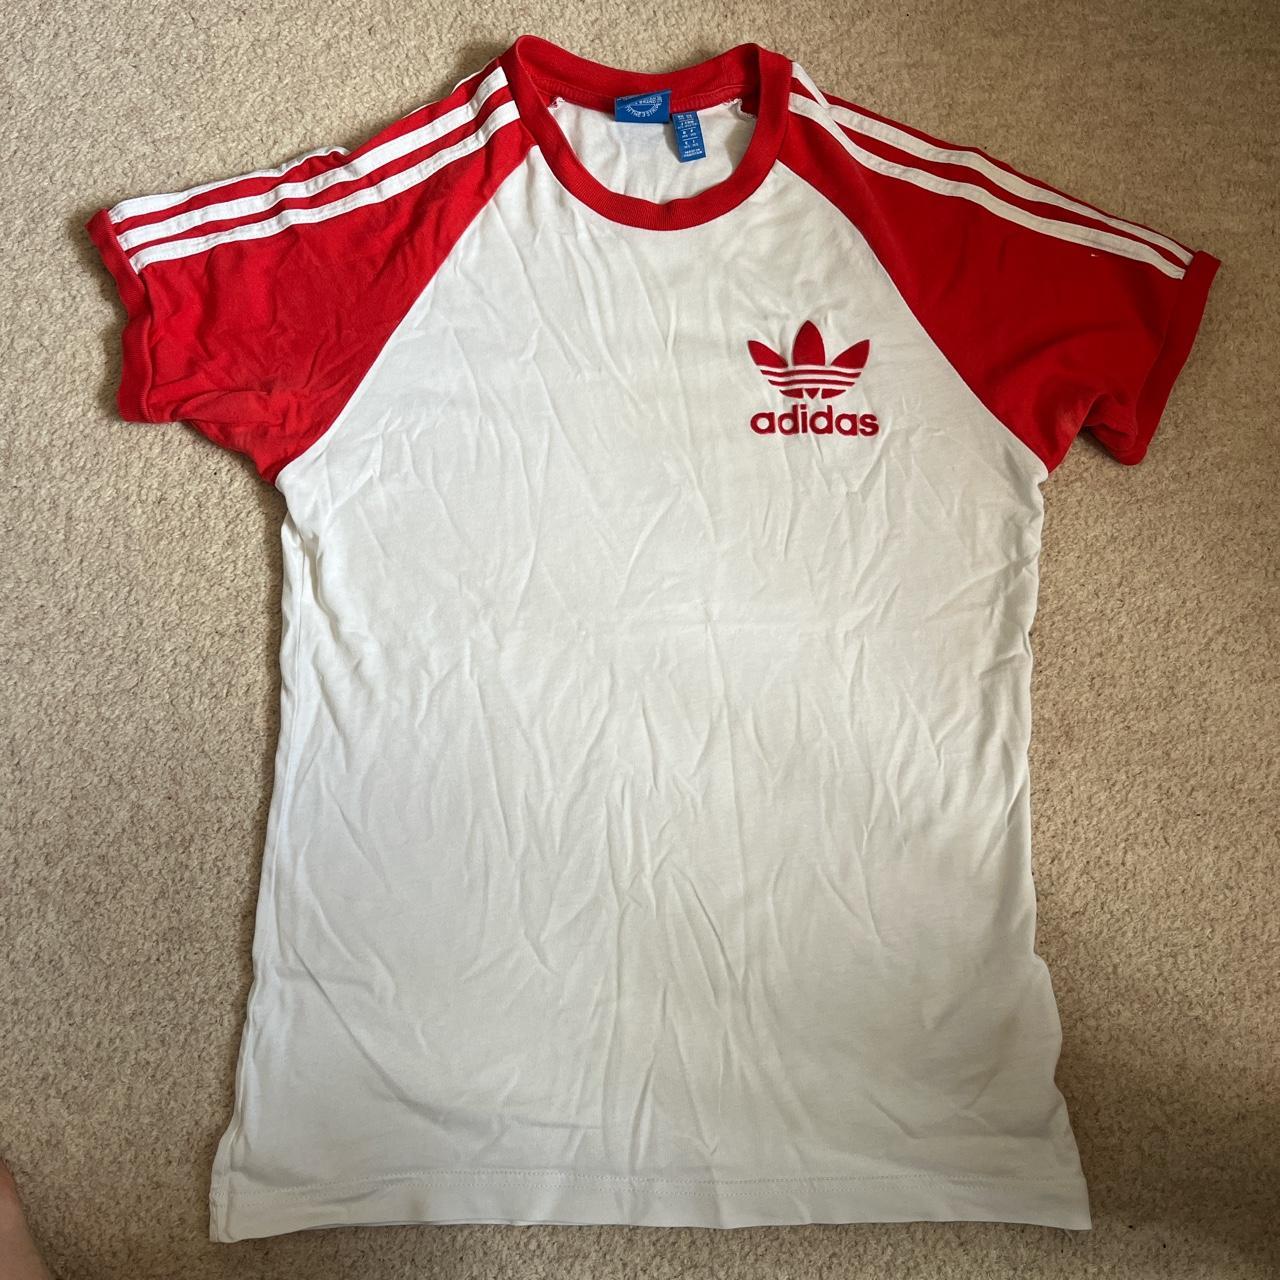 White and red adidas T-shirt - Depop